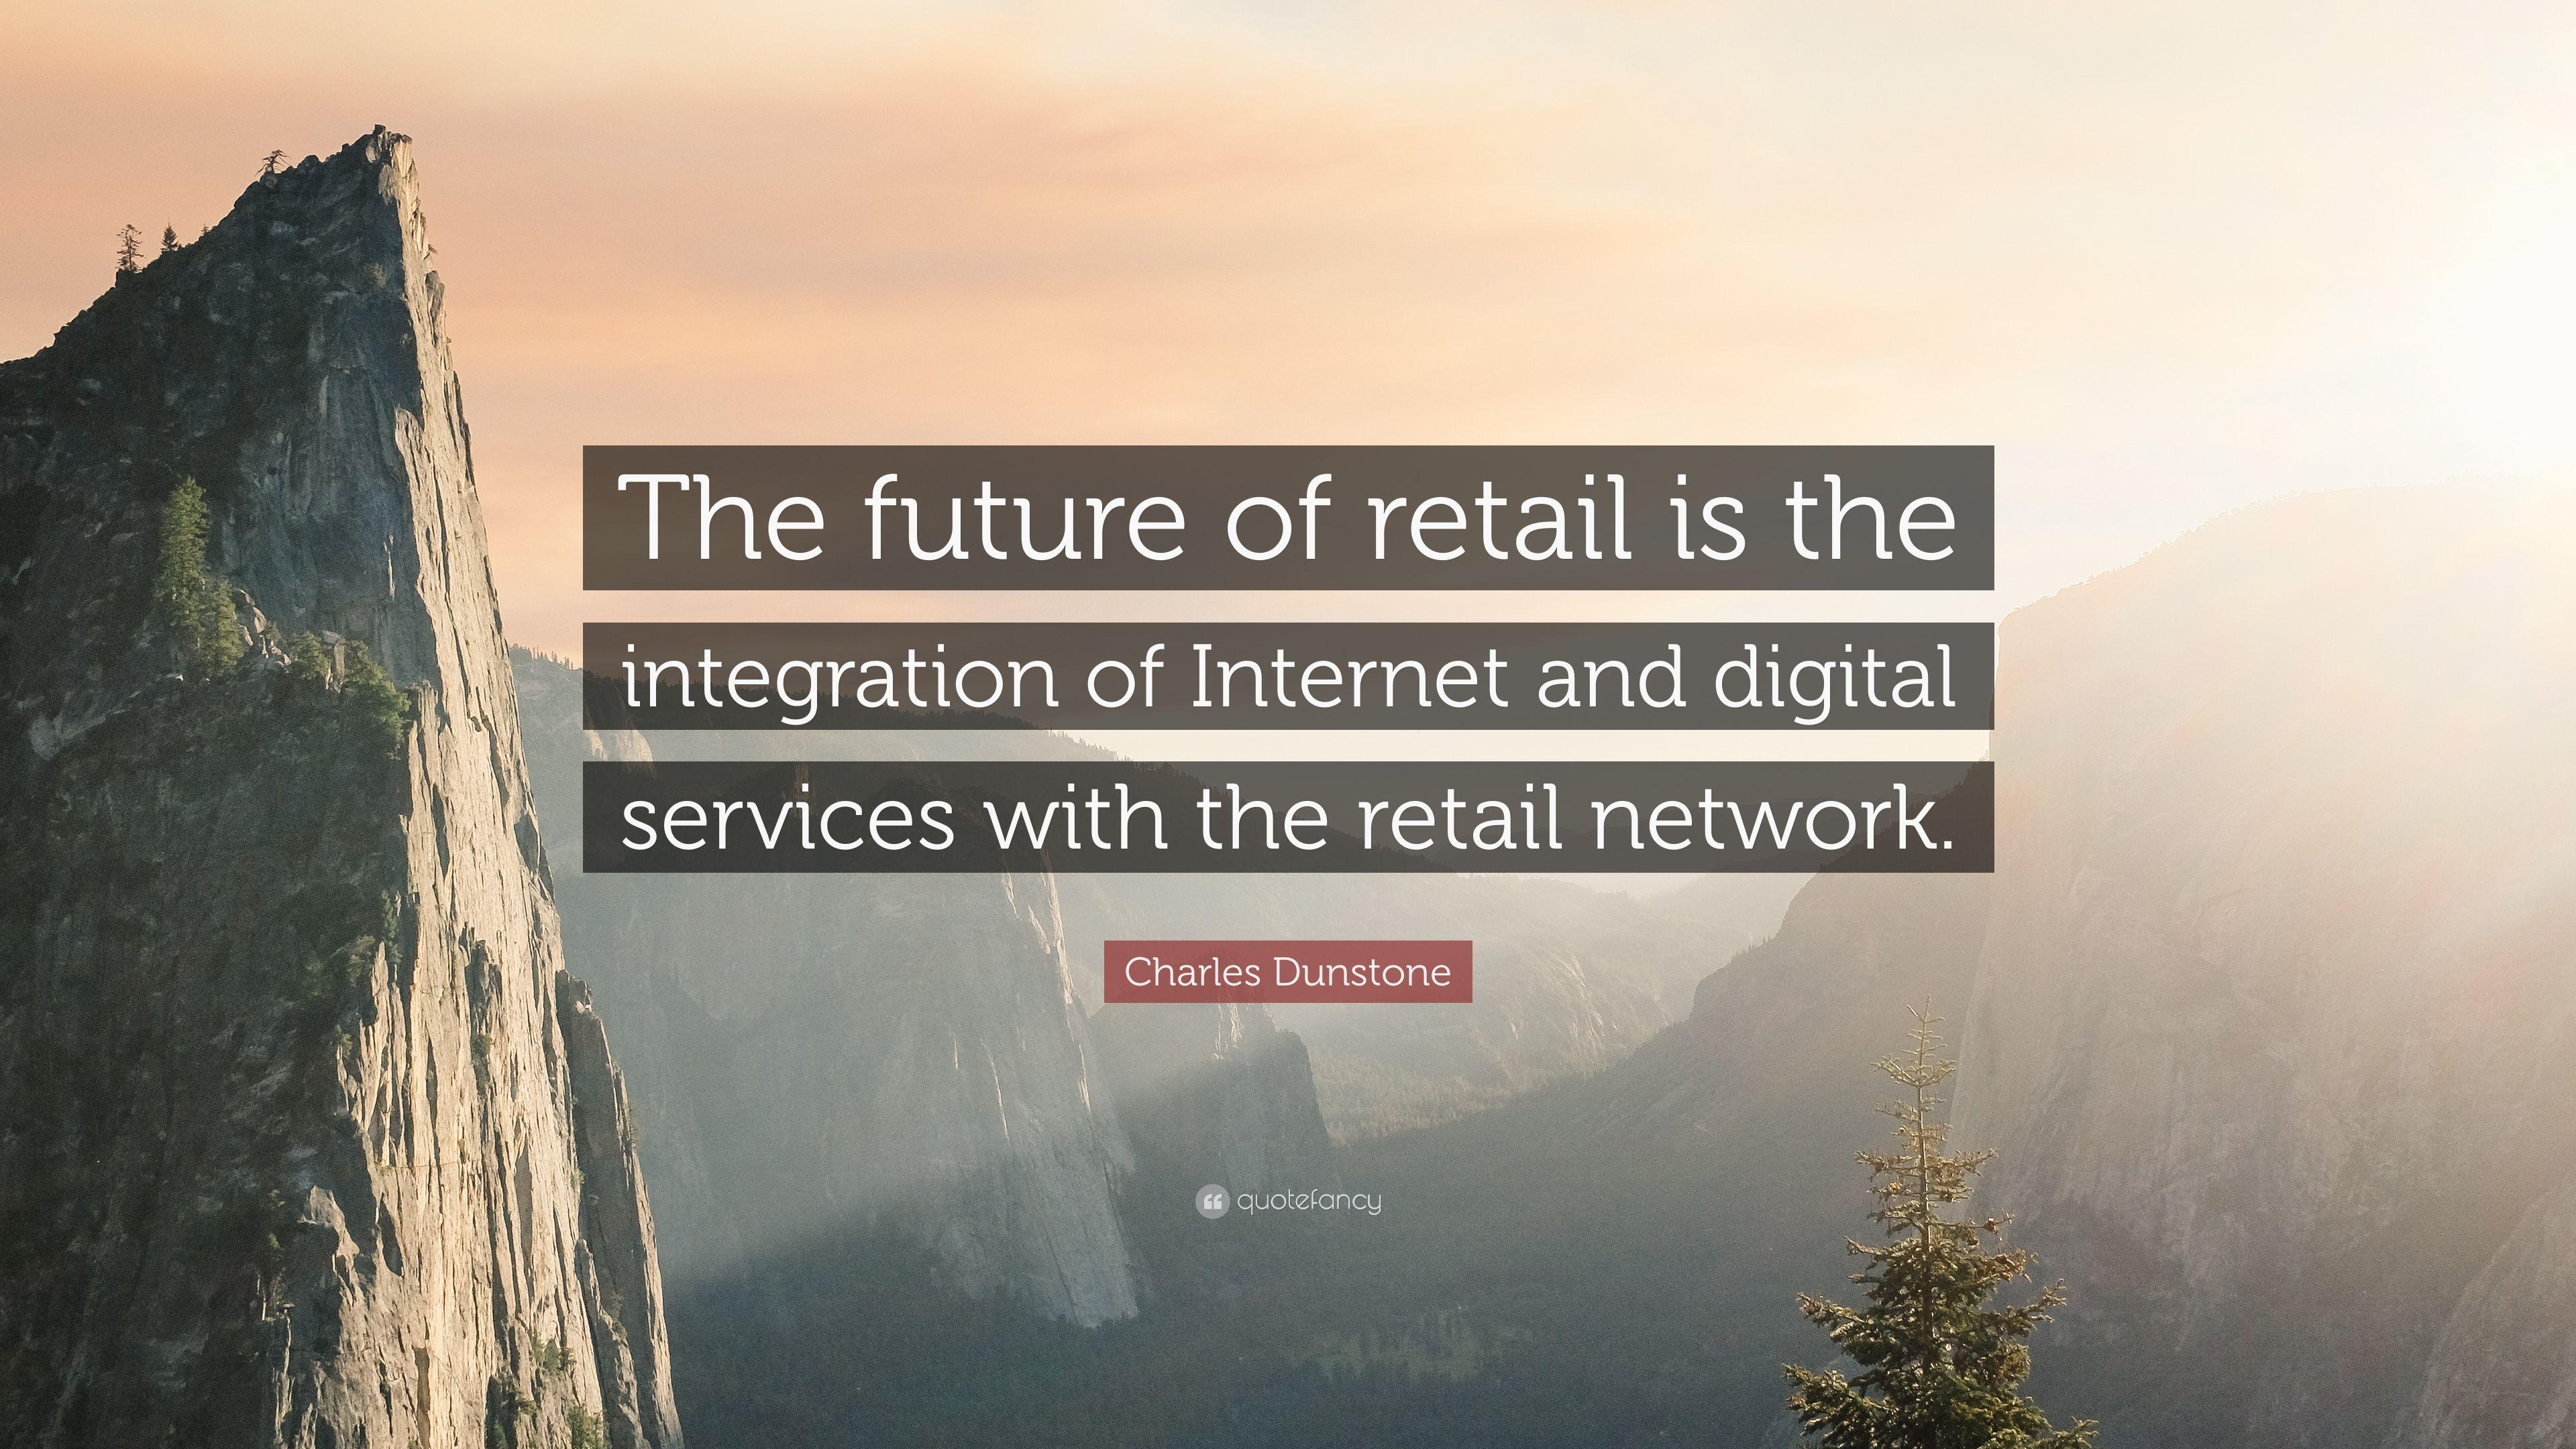 Charles Dunstone Quote: “The future of retail is the integration